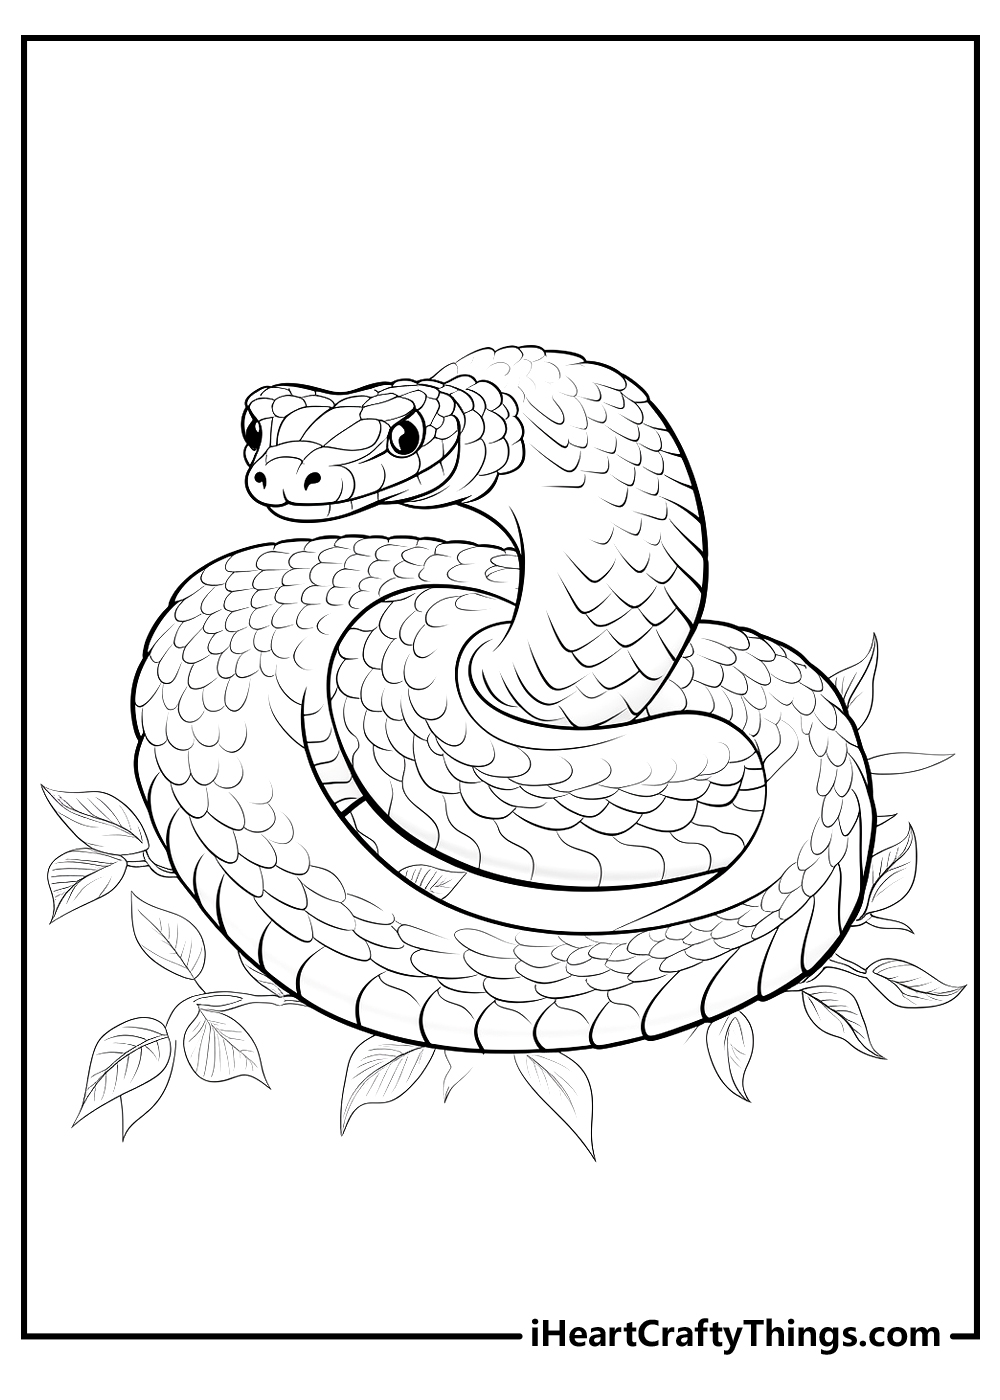 original snakes coloring pages